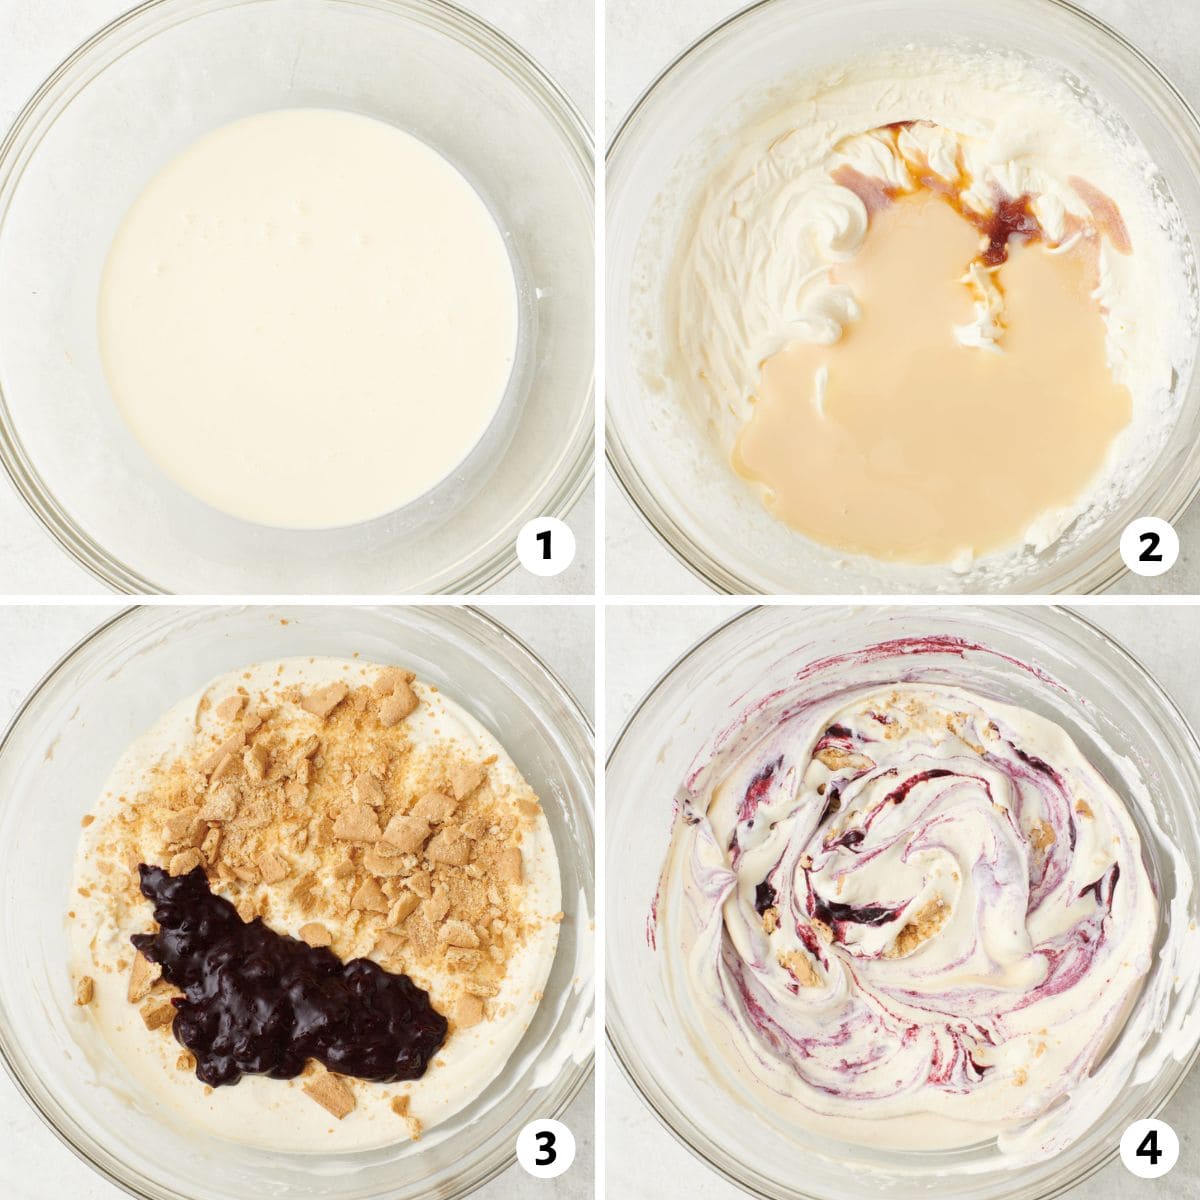 4 image collage making recipe: 1- cream in a bowl, 2- after whipping with condensed milk and vanilla added, 3- after mixing with blueberry compote and crushed graham crackers added, 4- after swirling into ice cream mixture.